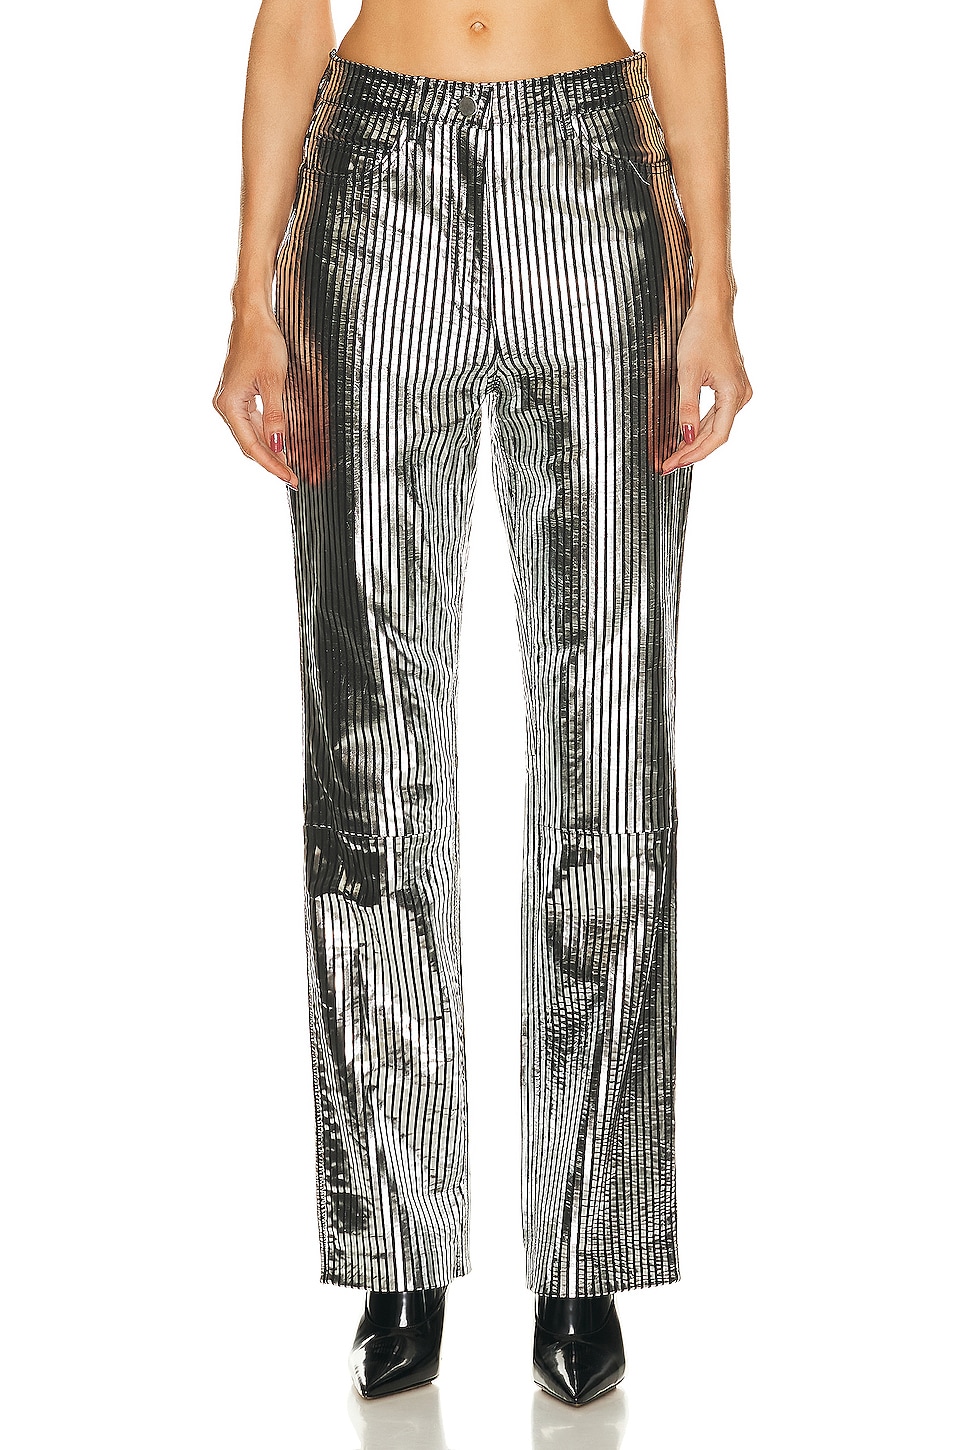 Striped Leather Pant in Metallic Silver